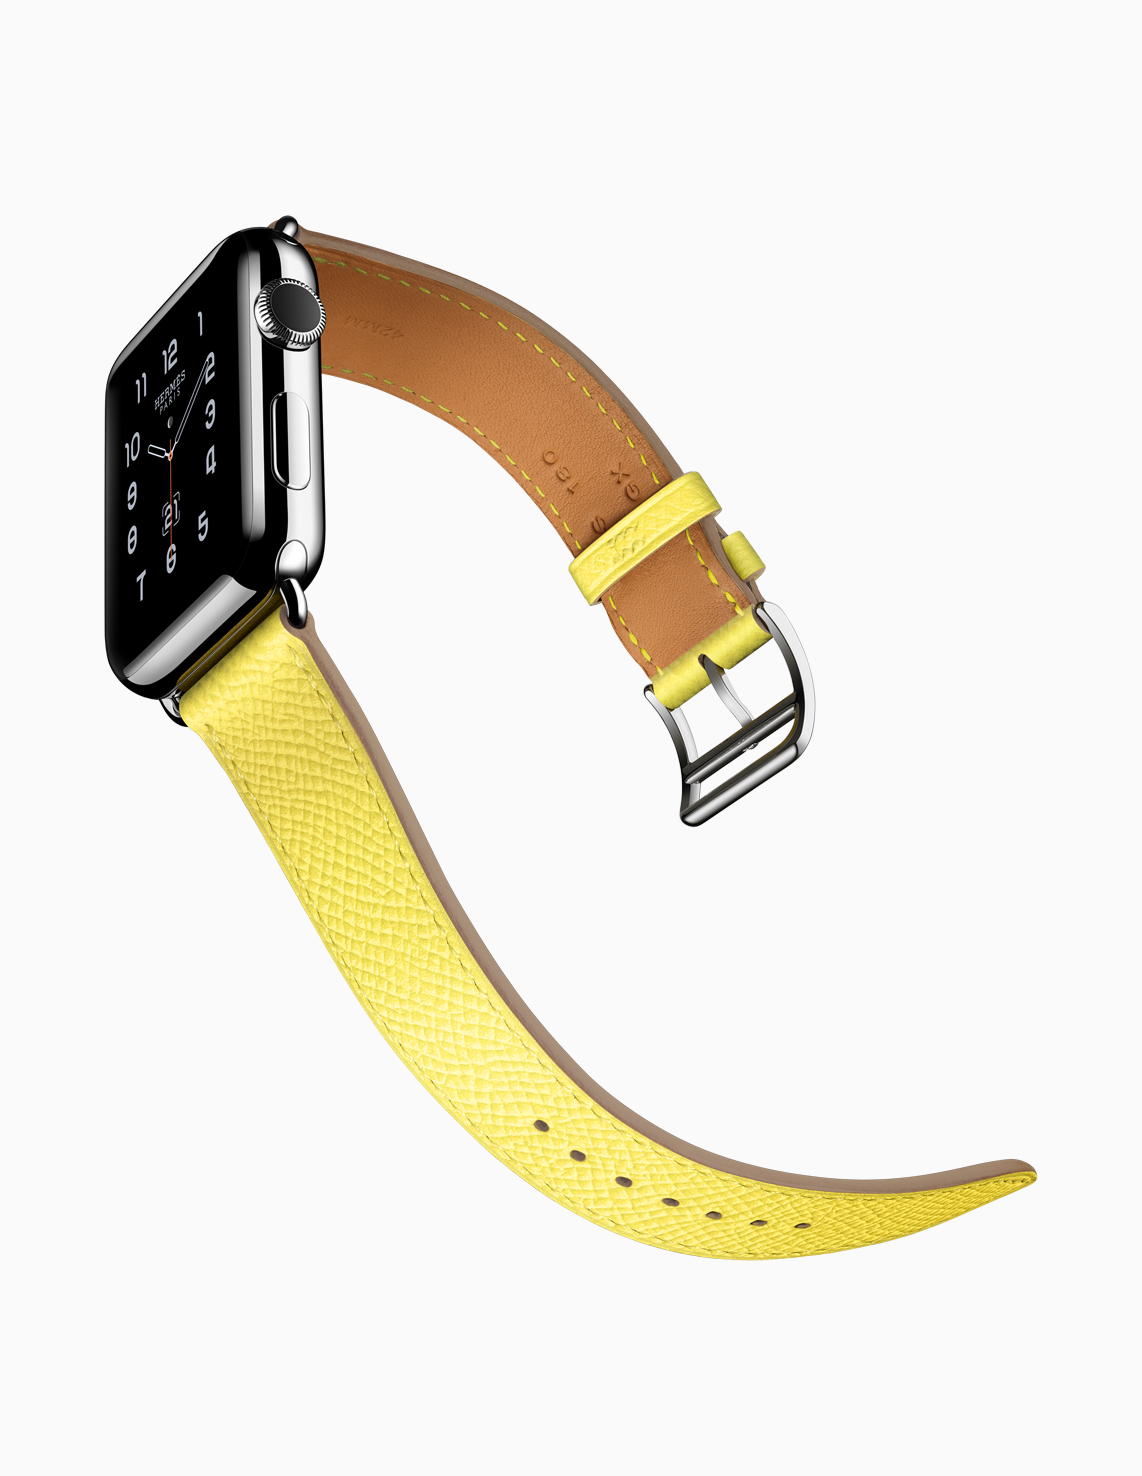 Apple Unveils New Apple Watch Bands for Spring 2017